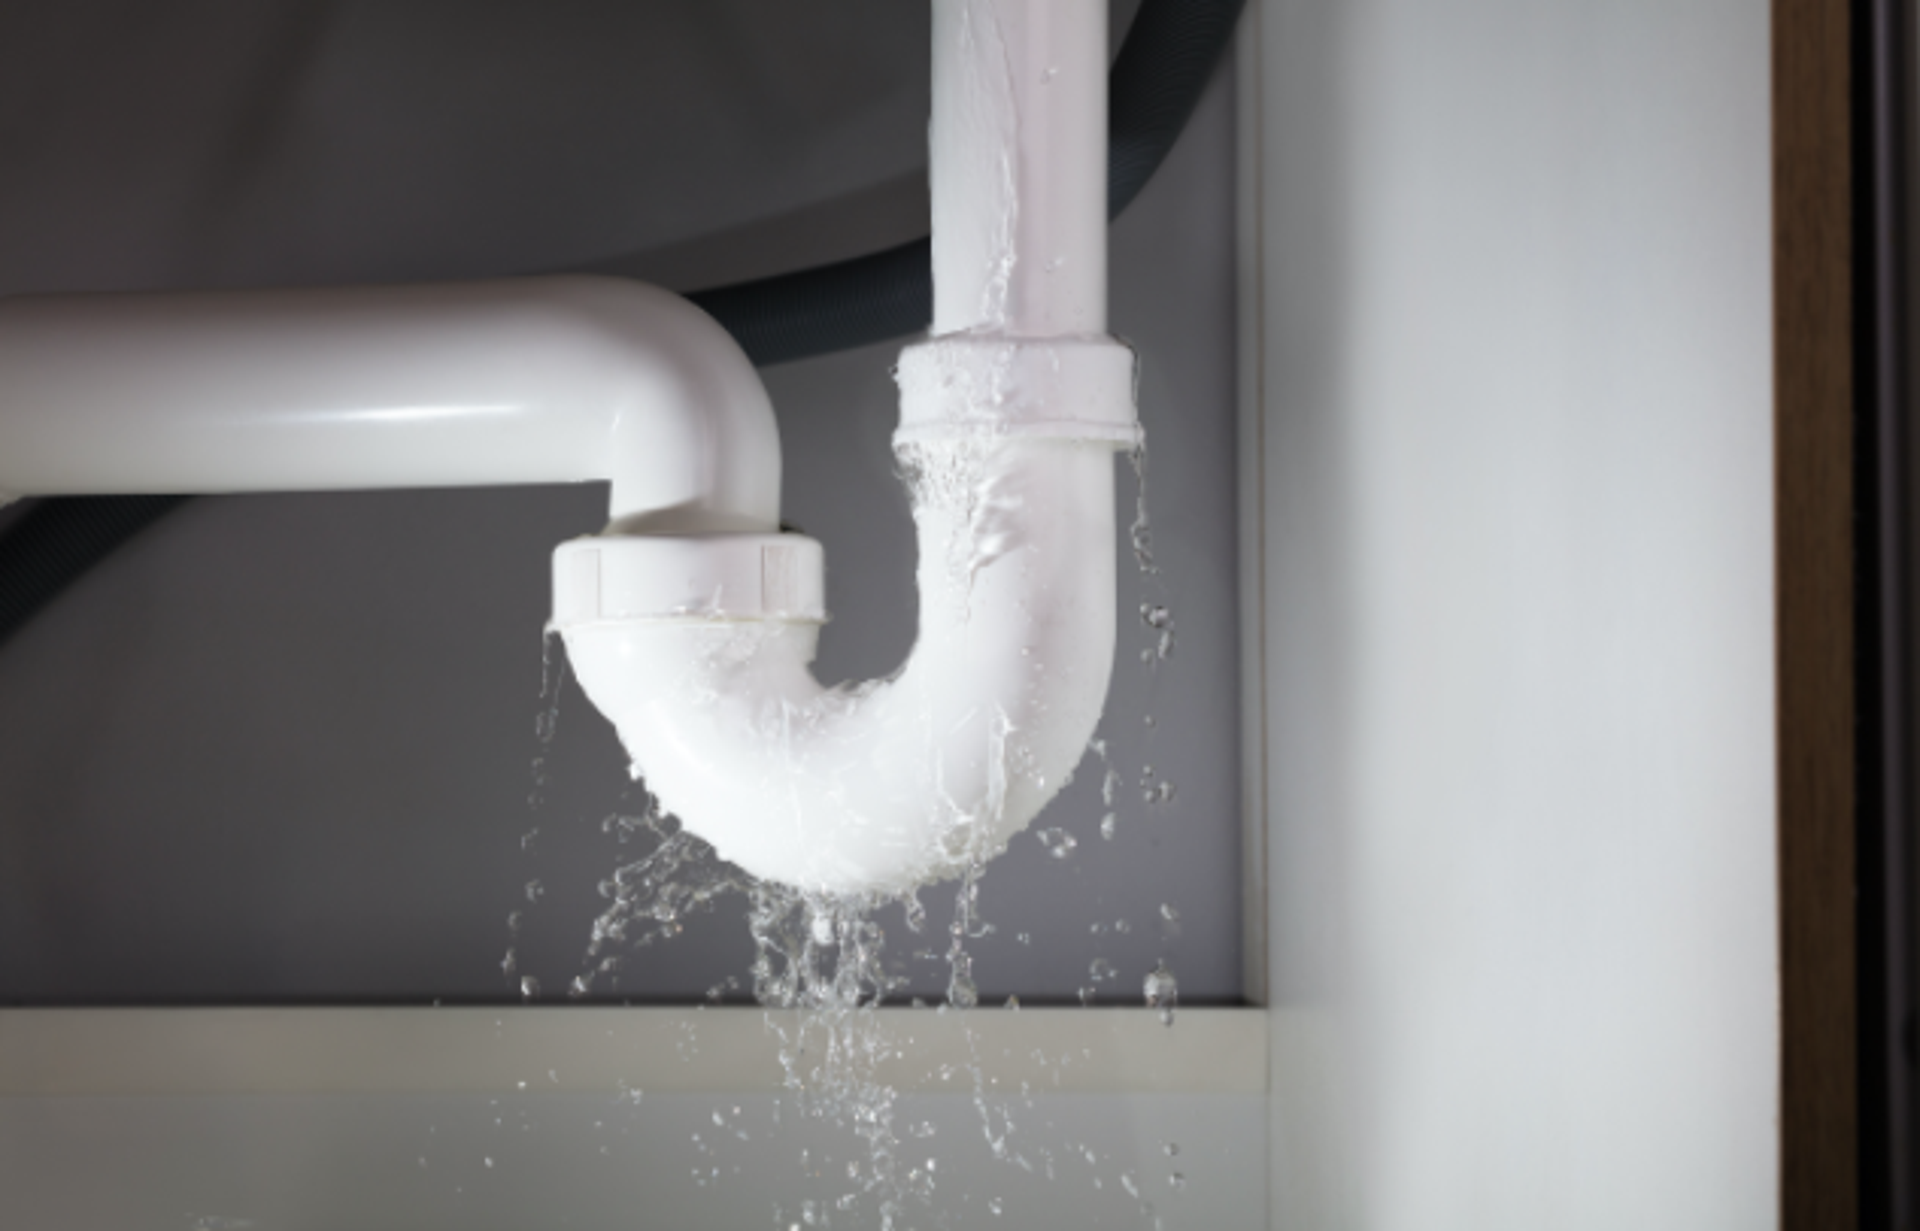 A leaking pipe can cause water damage in your home or business. Looking for water damage restoration near you? Call SERVPRO for 24/7 emergency service water removal, cleanup, and damage assessment near me.  